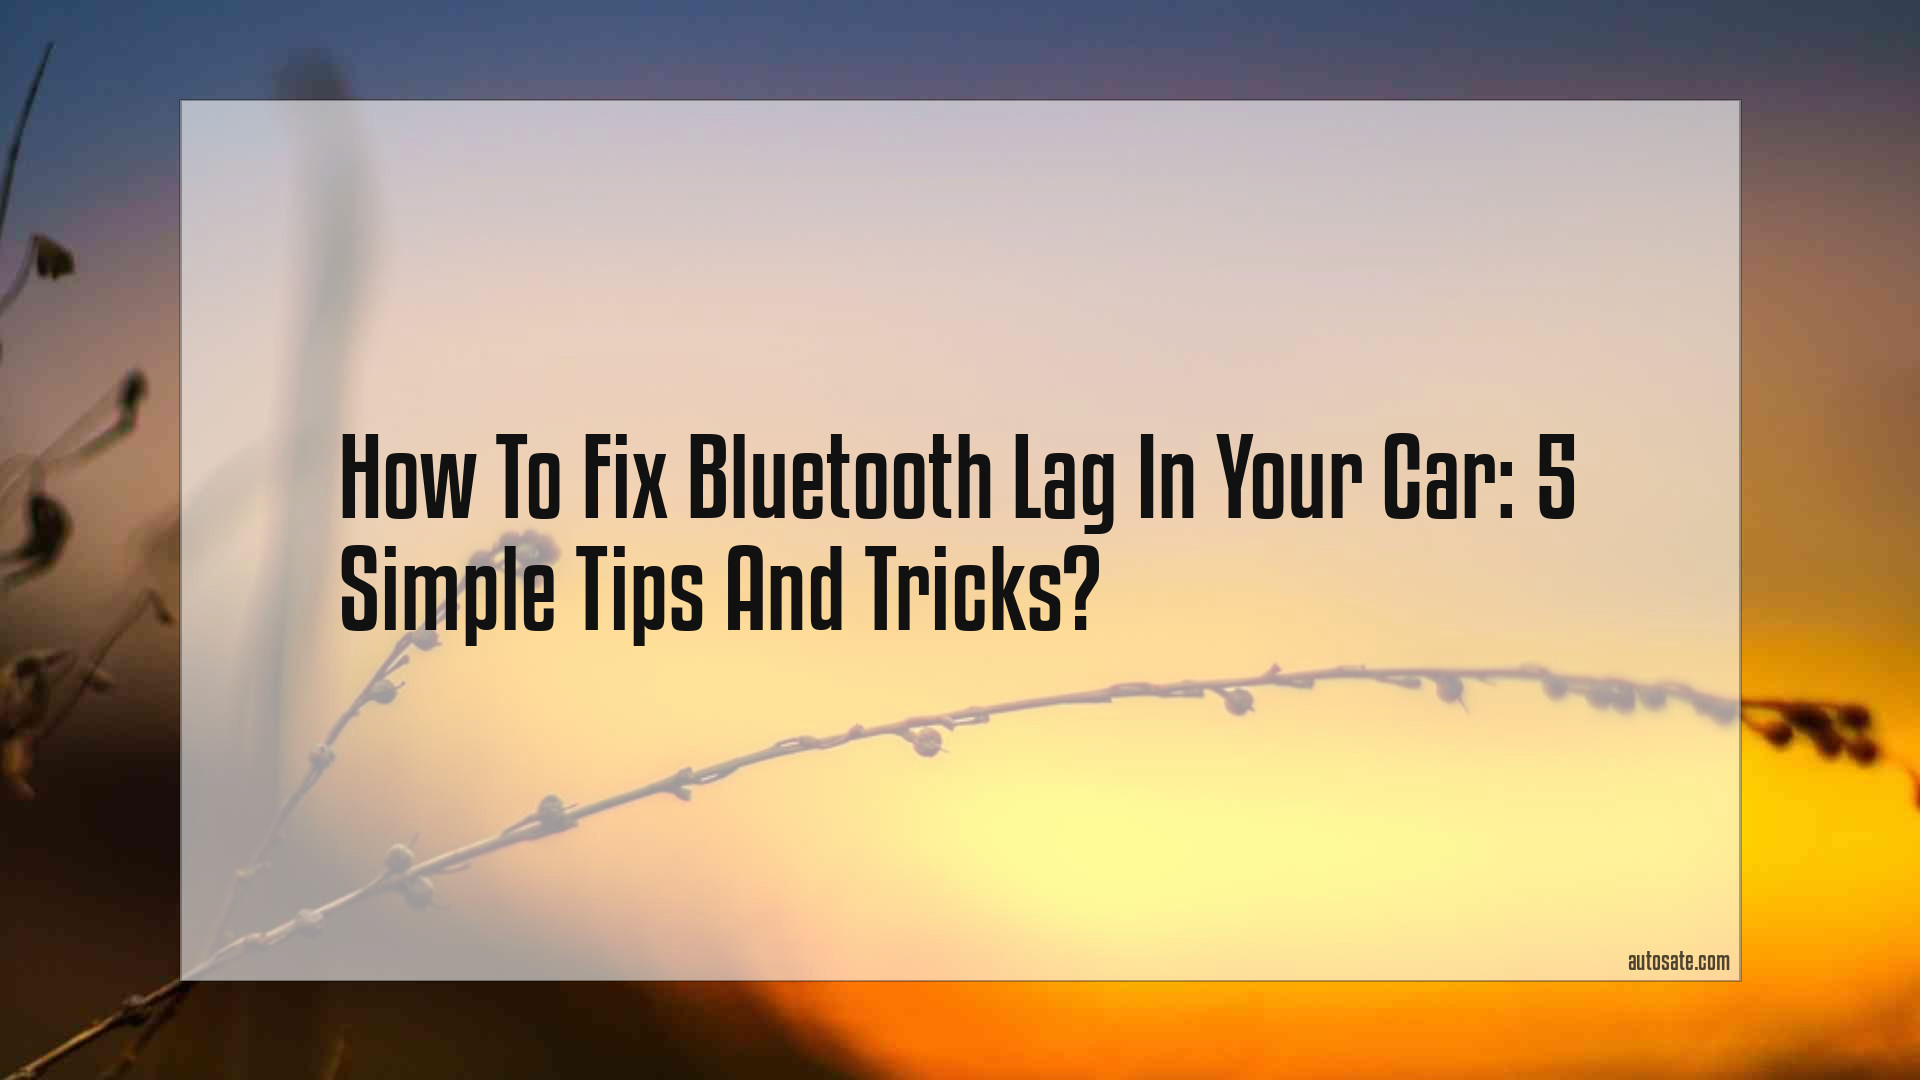 How To Fix Bluetooth Lag In Your Car: 5 Simple Tips And Tricks